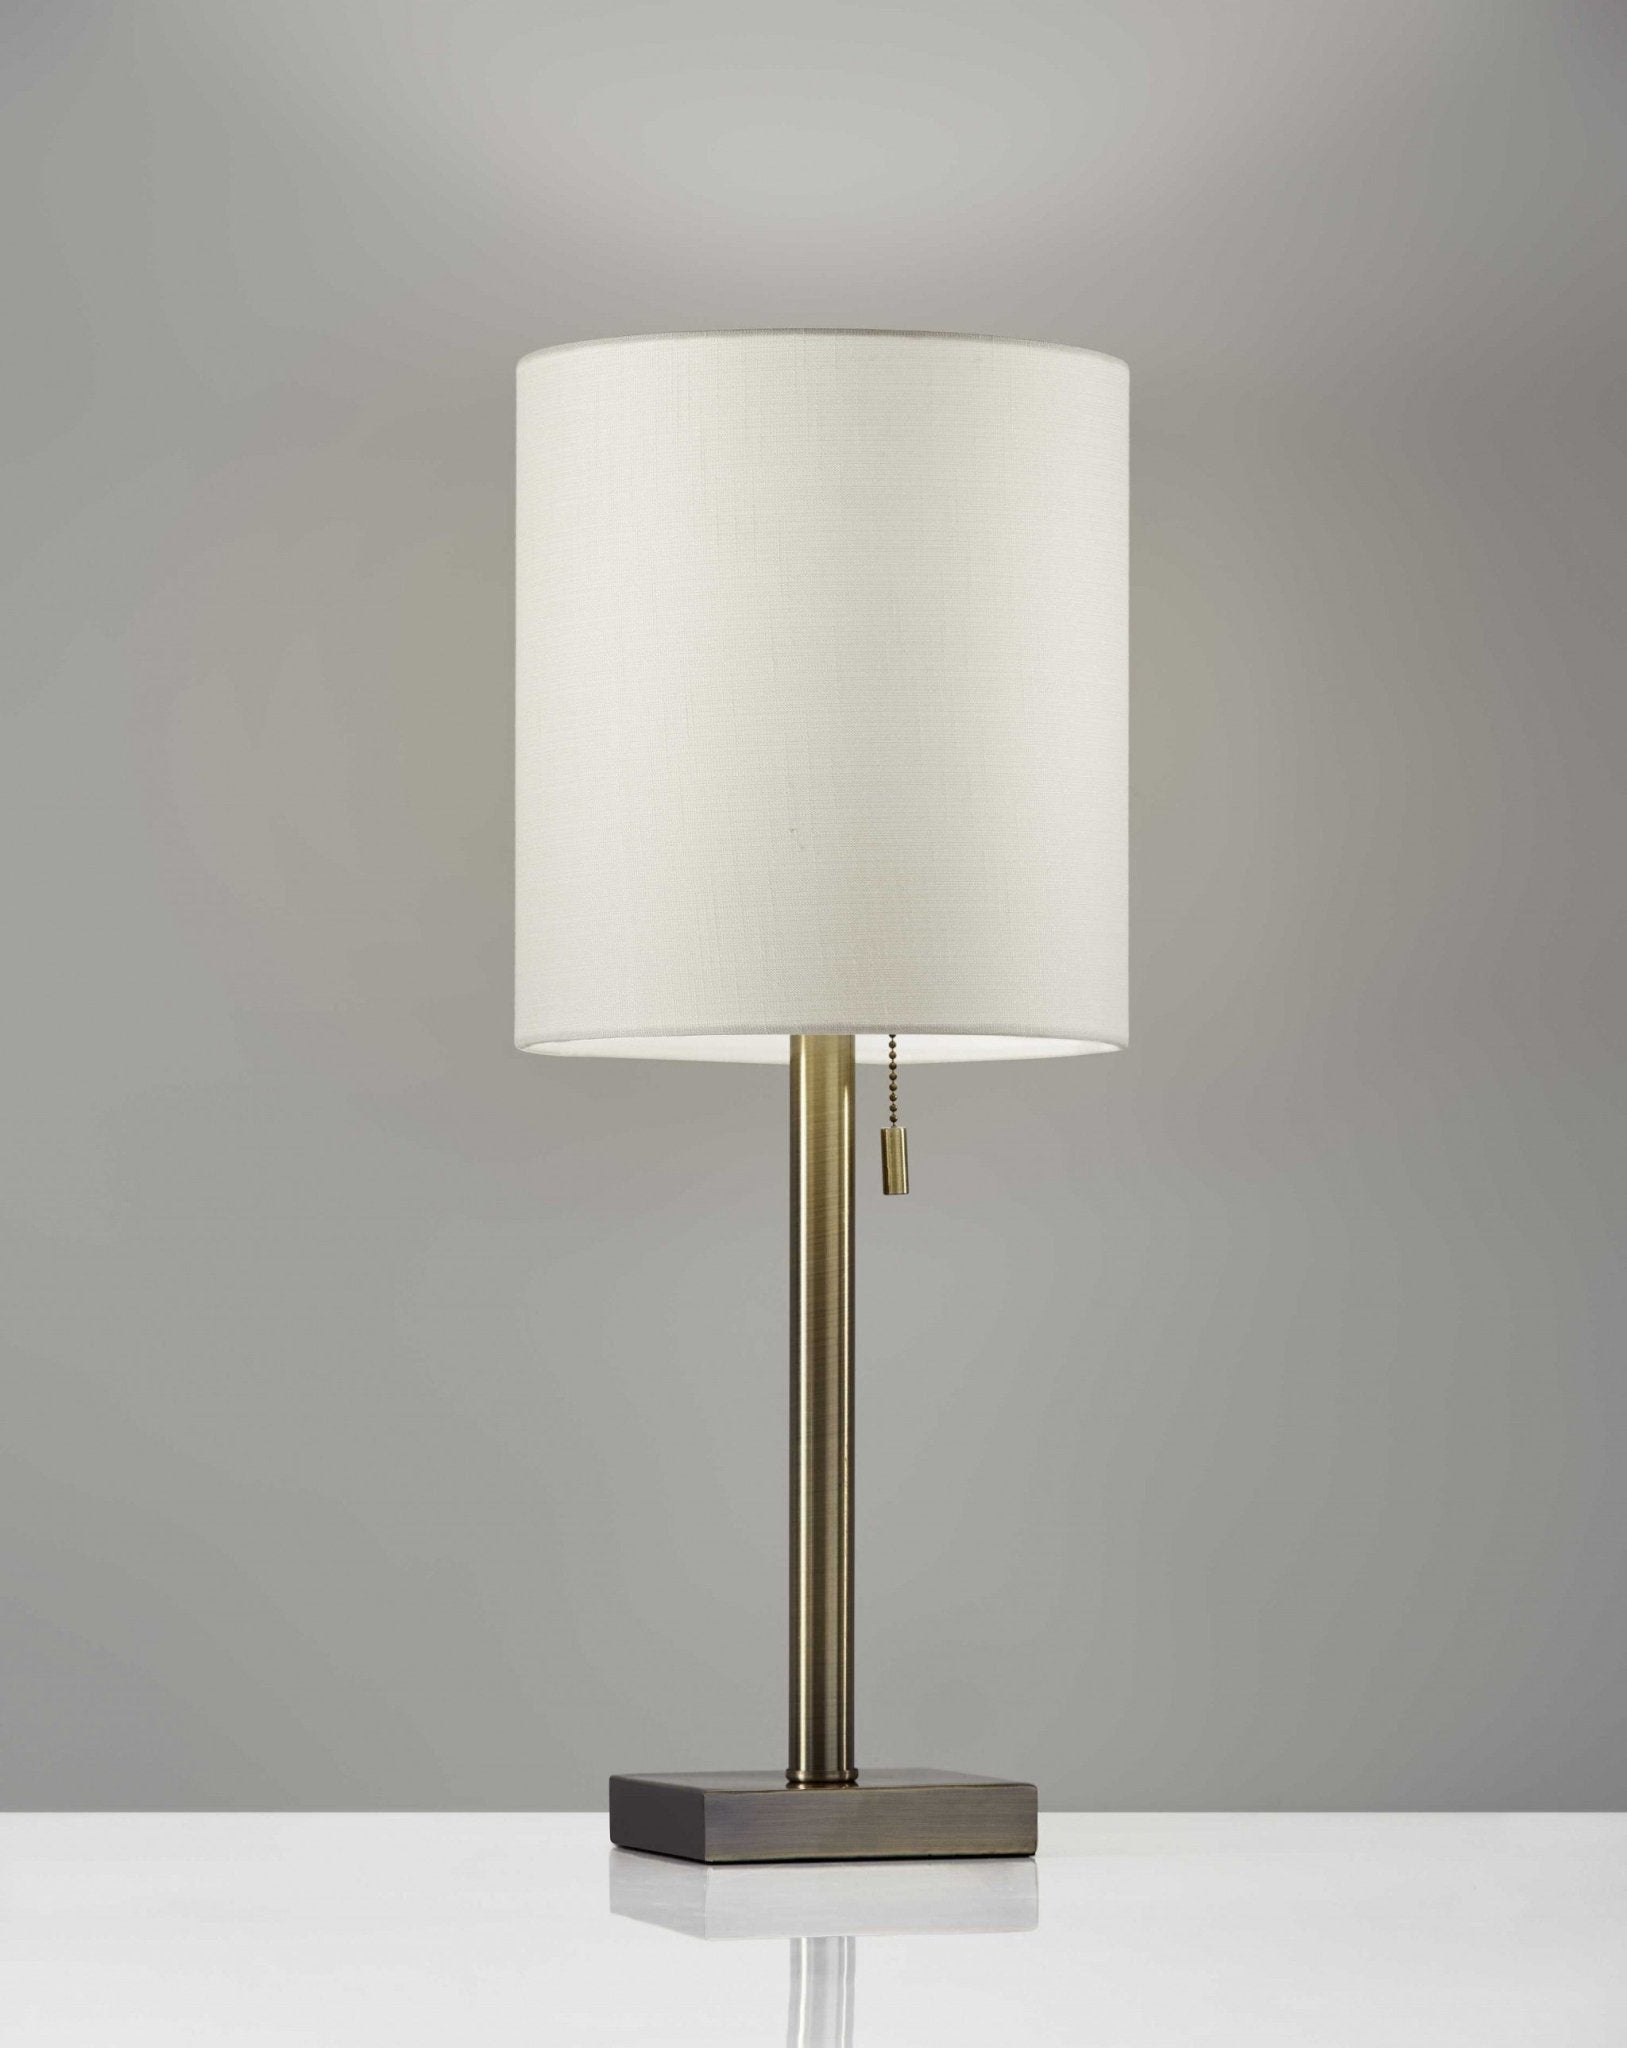 Brass-Metal-Table-Lamp-Table-Lamps